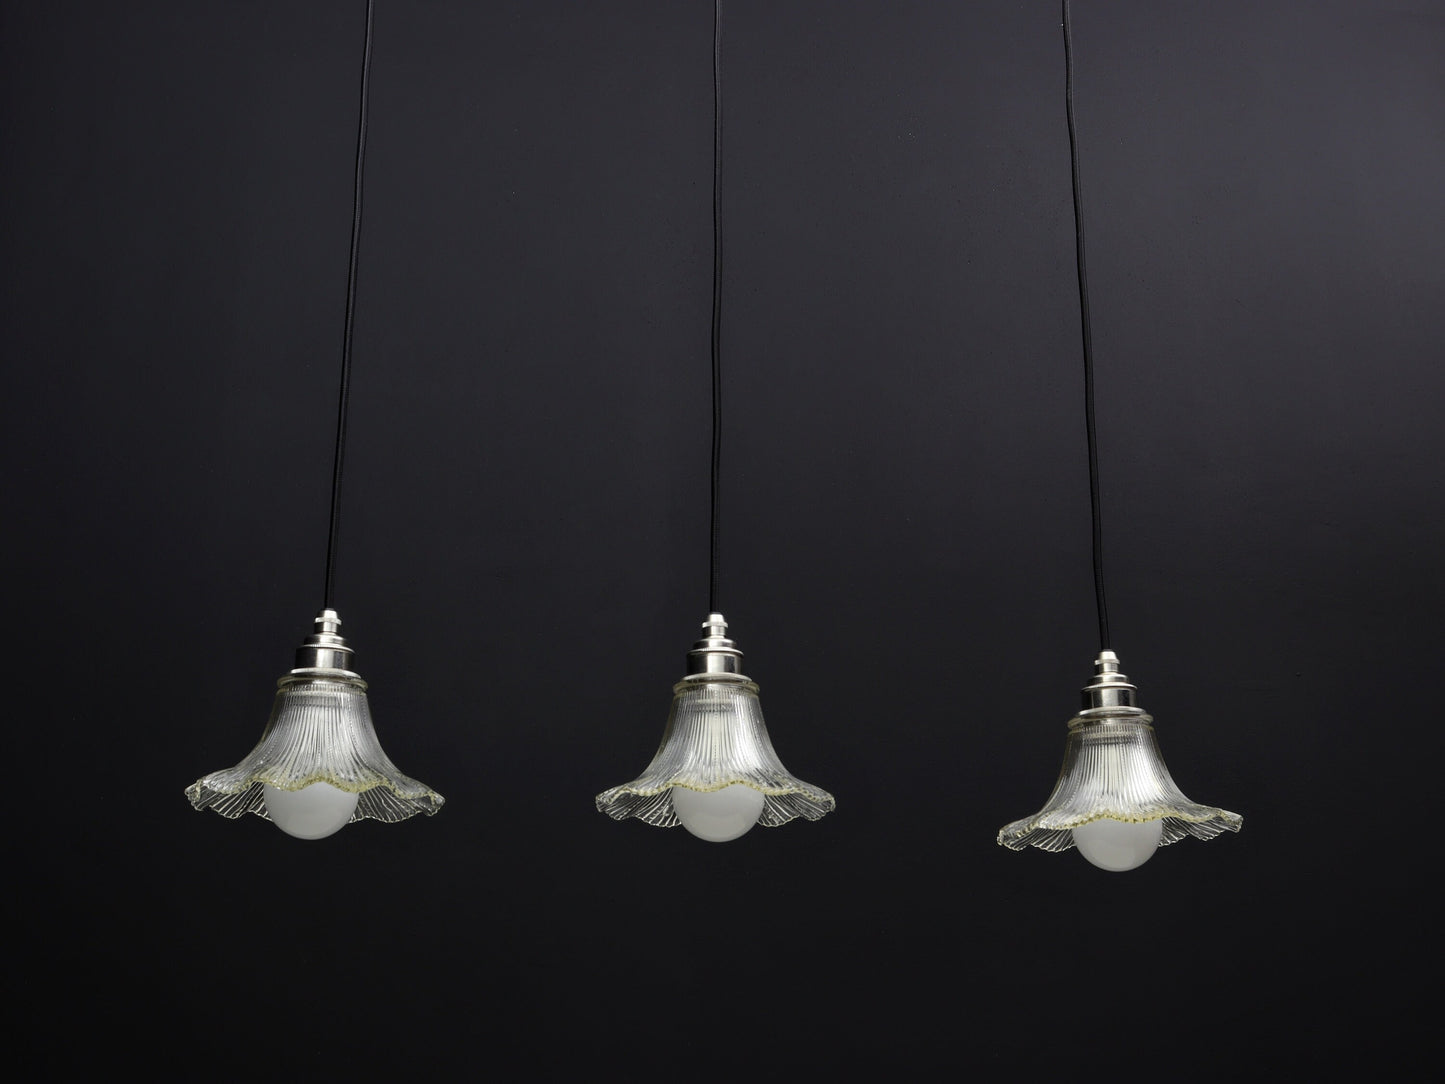 Stylish Modern Pendant Lights from Antique Glass Shades | Antique Lighting Fixtures